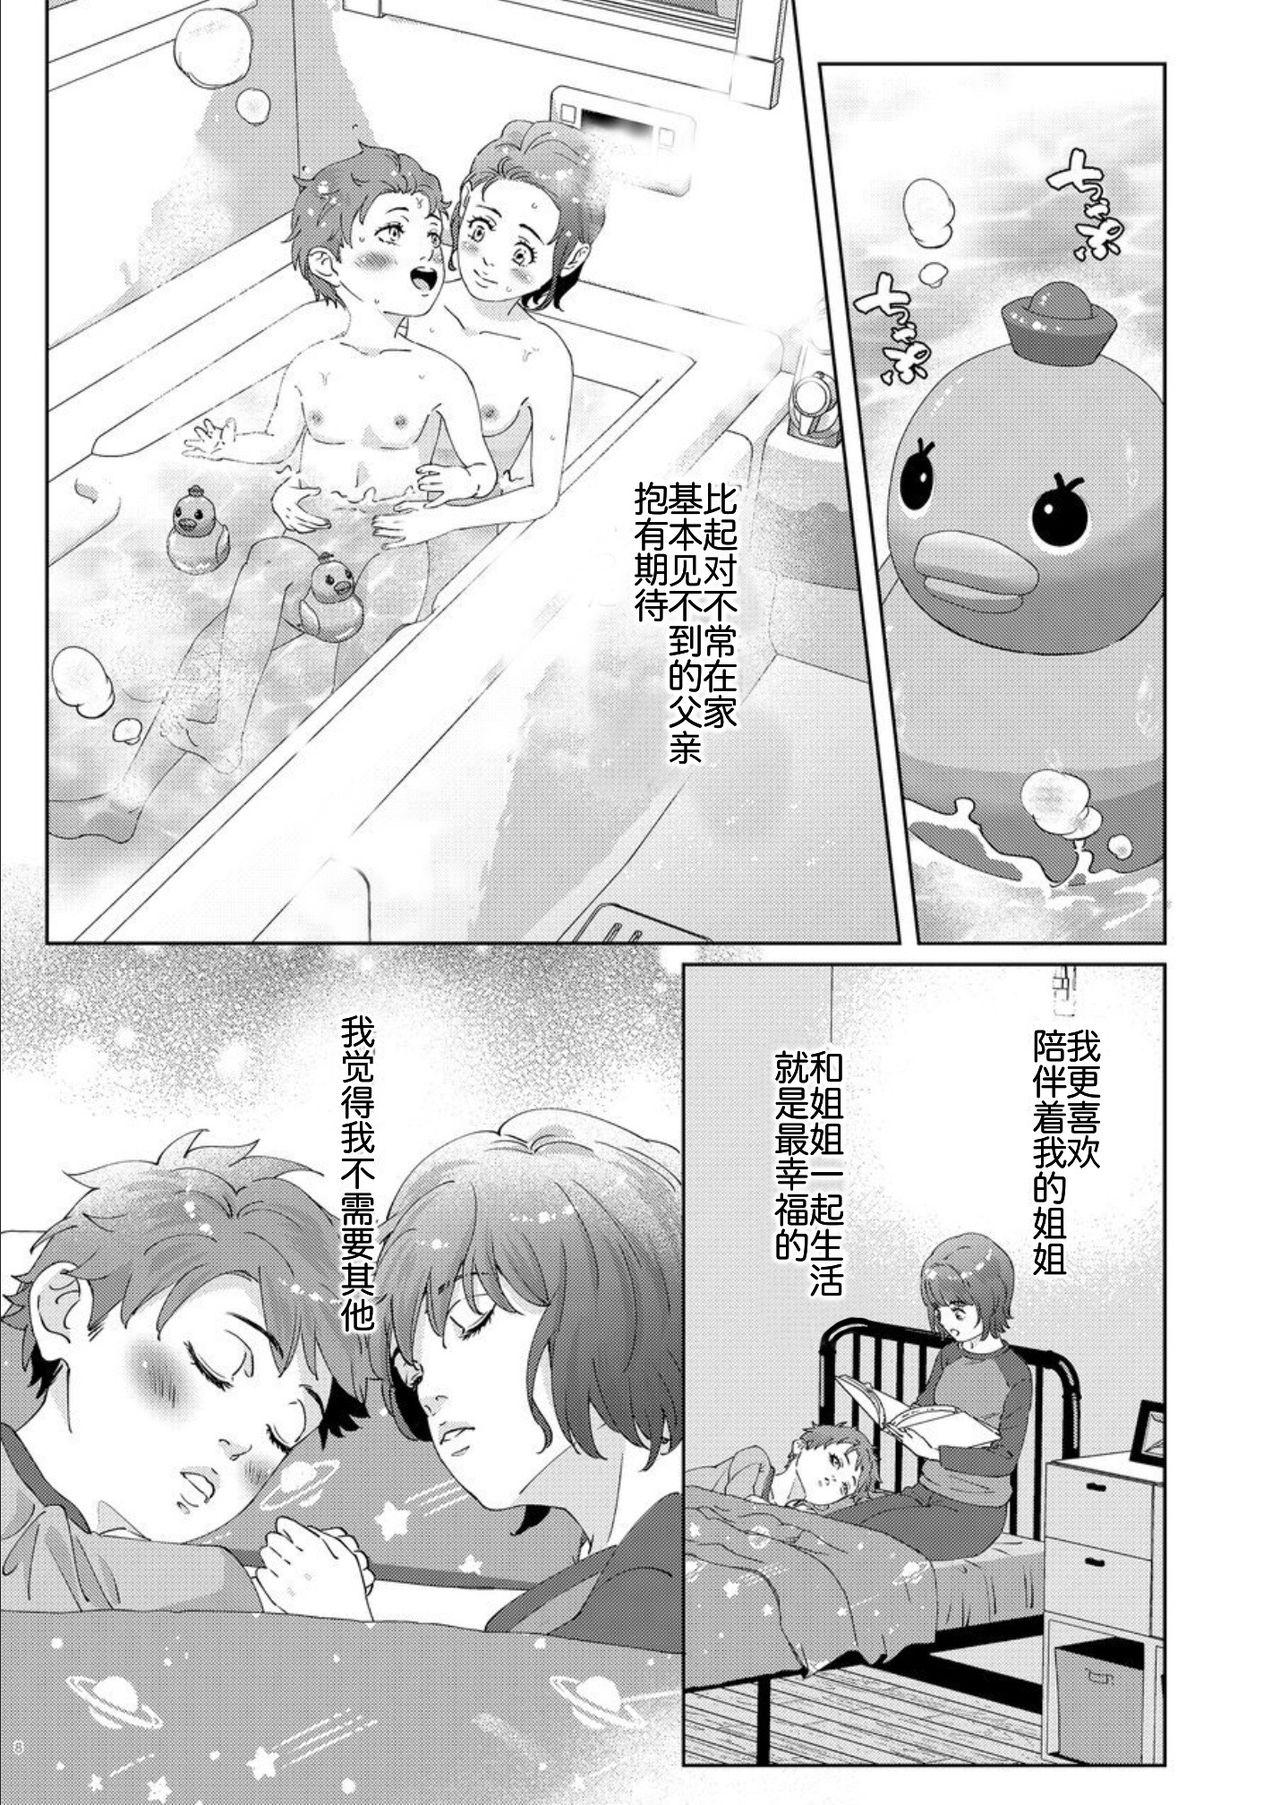 Pussy To Mouth Oneesan no panty （Chinese ver.） - Original Cruising - Page 7